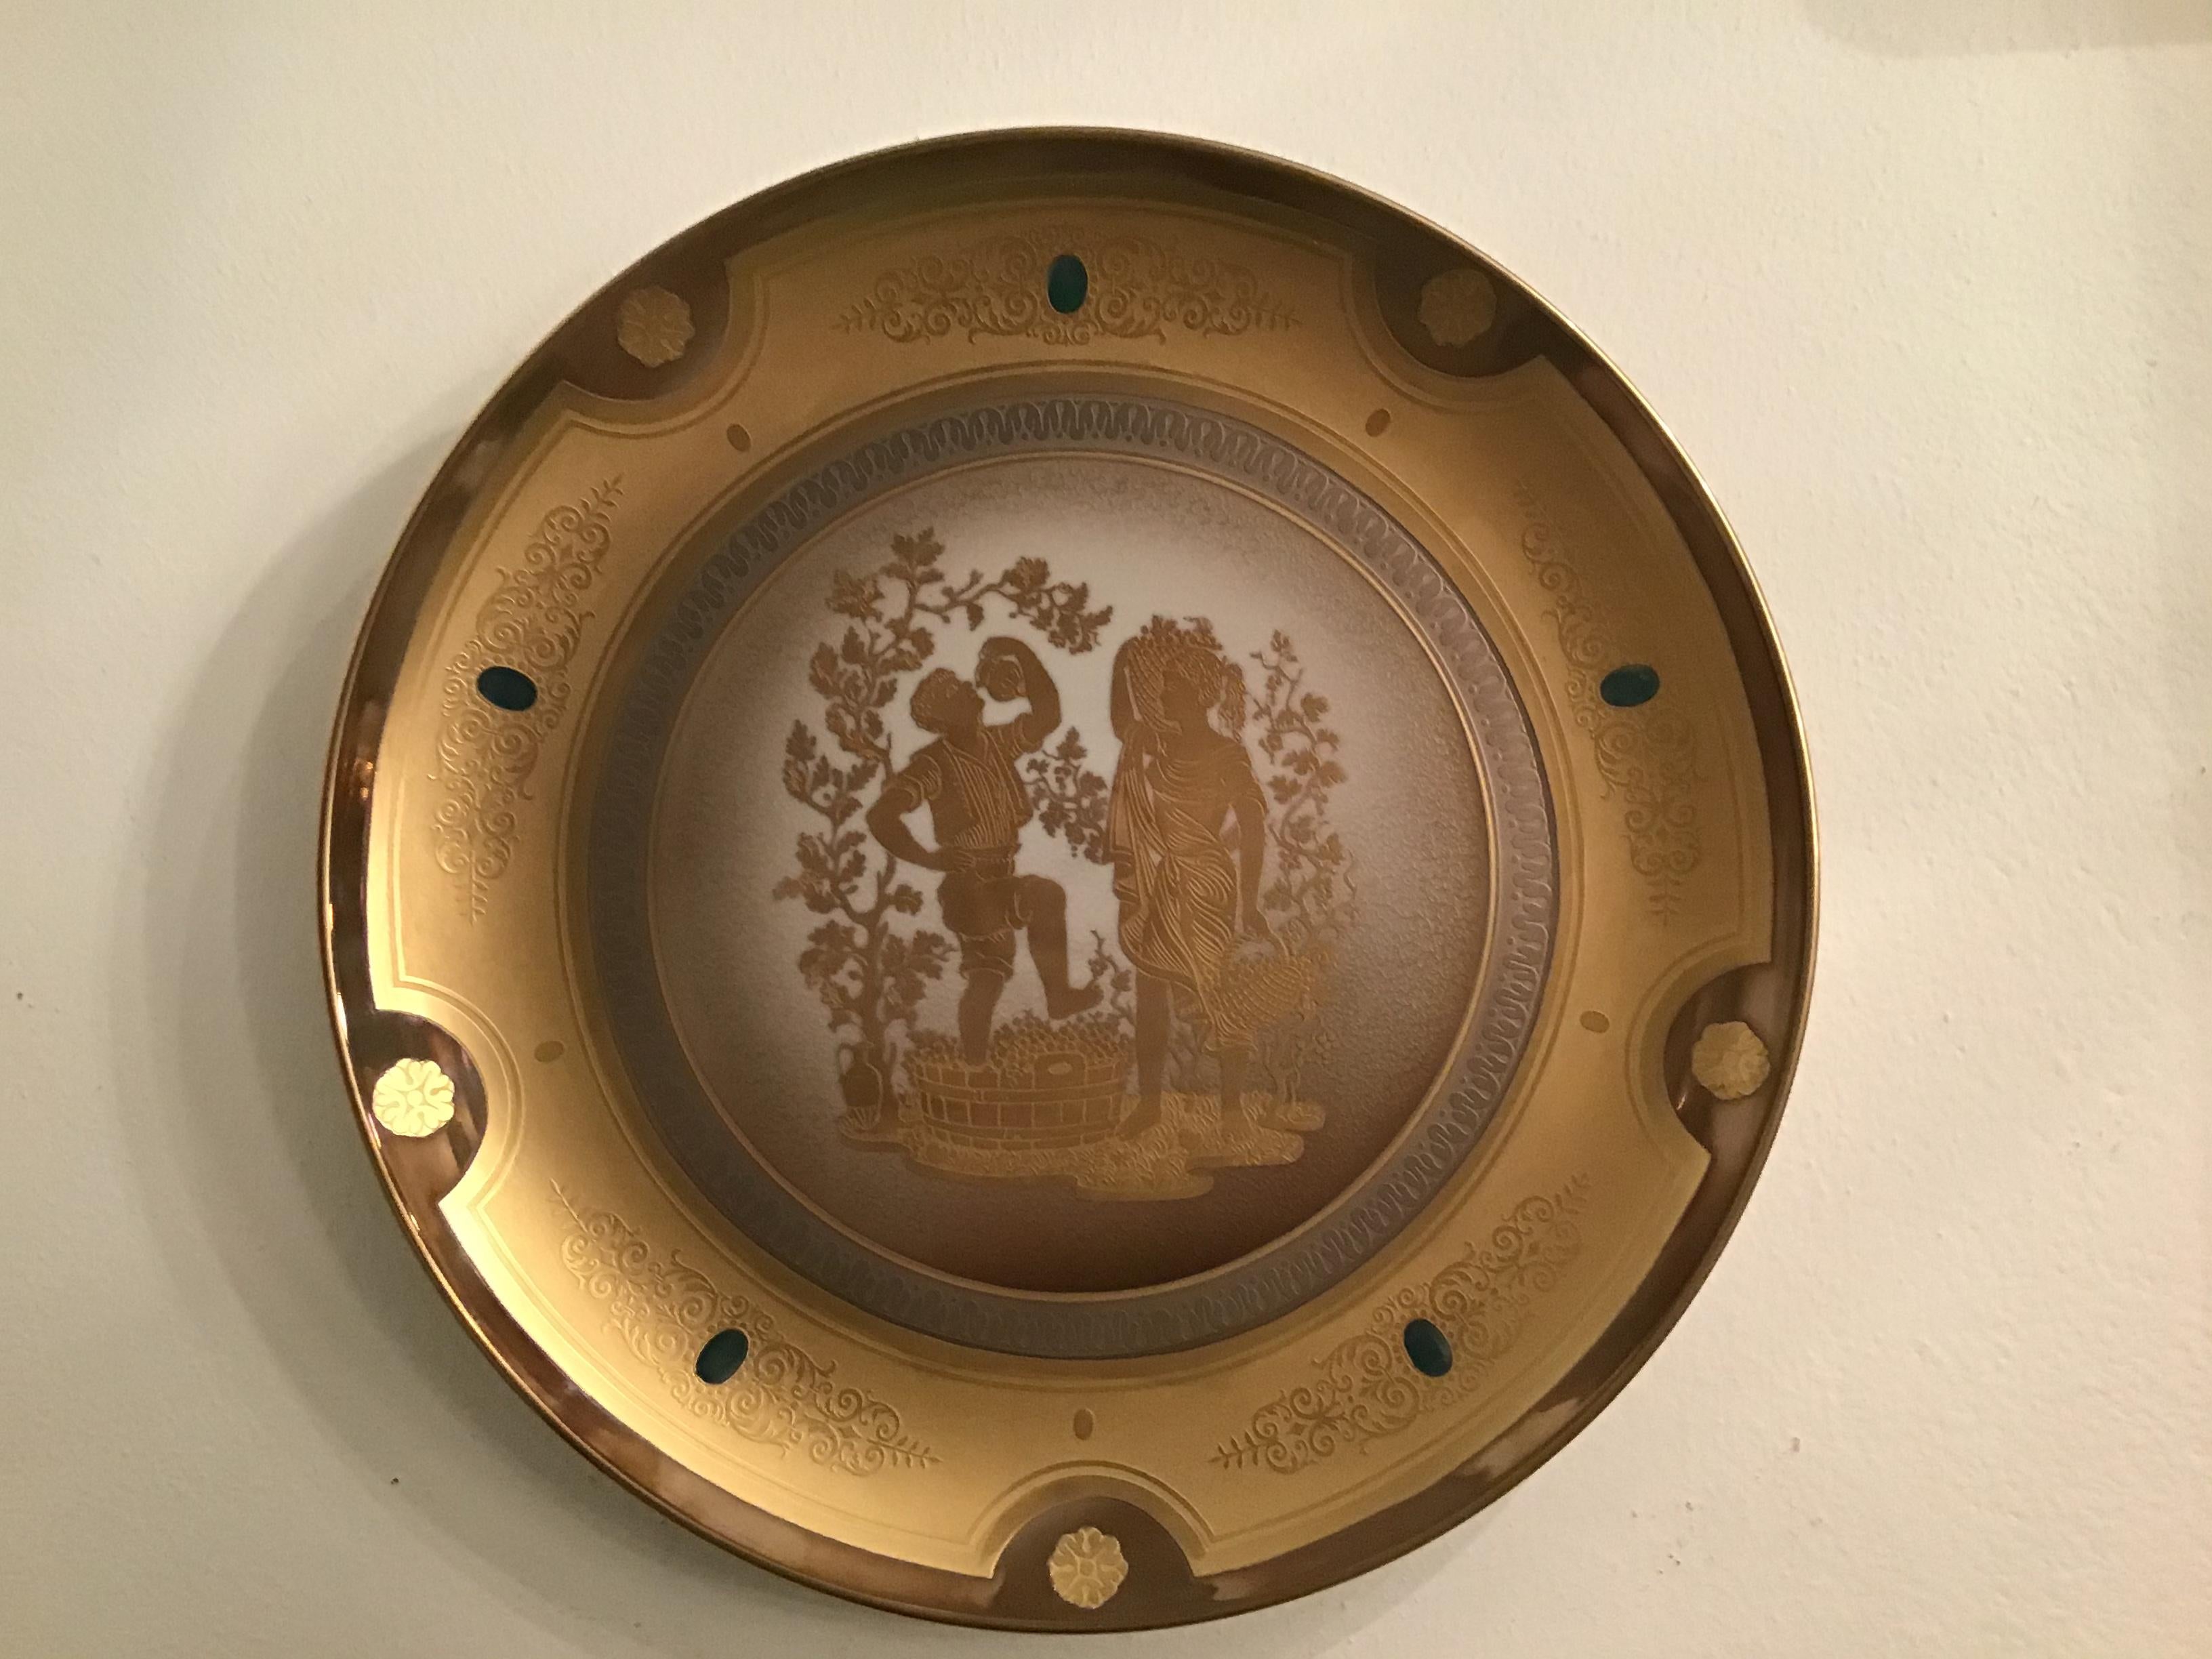 Morbelli Porcelain Wall Plate Gold “ Autunno”, 1960, Italy For Sale 3